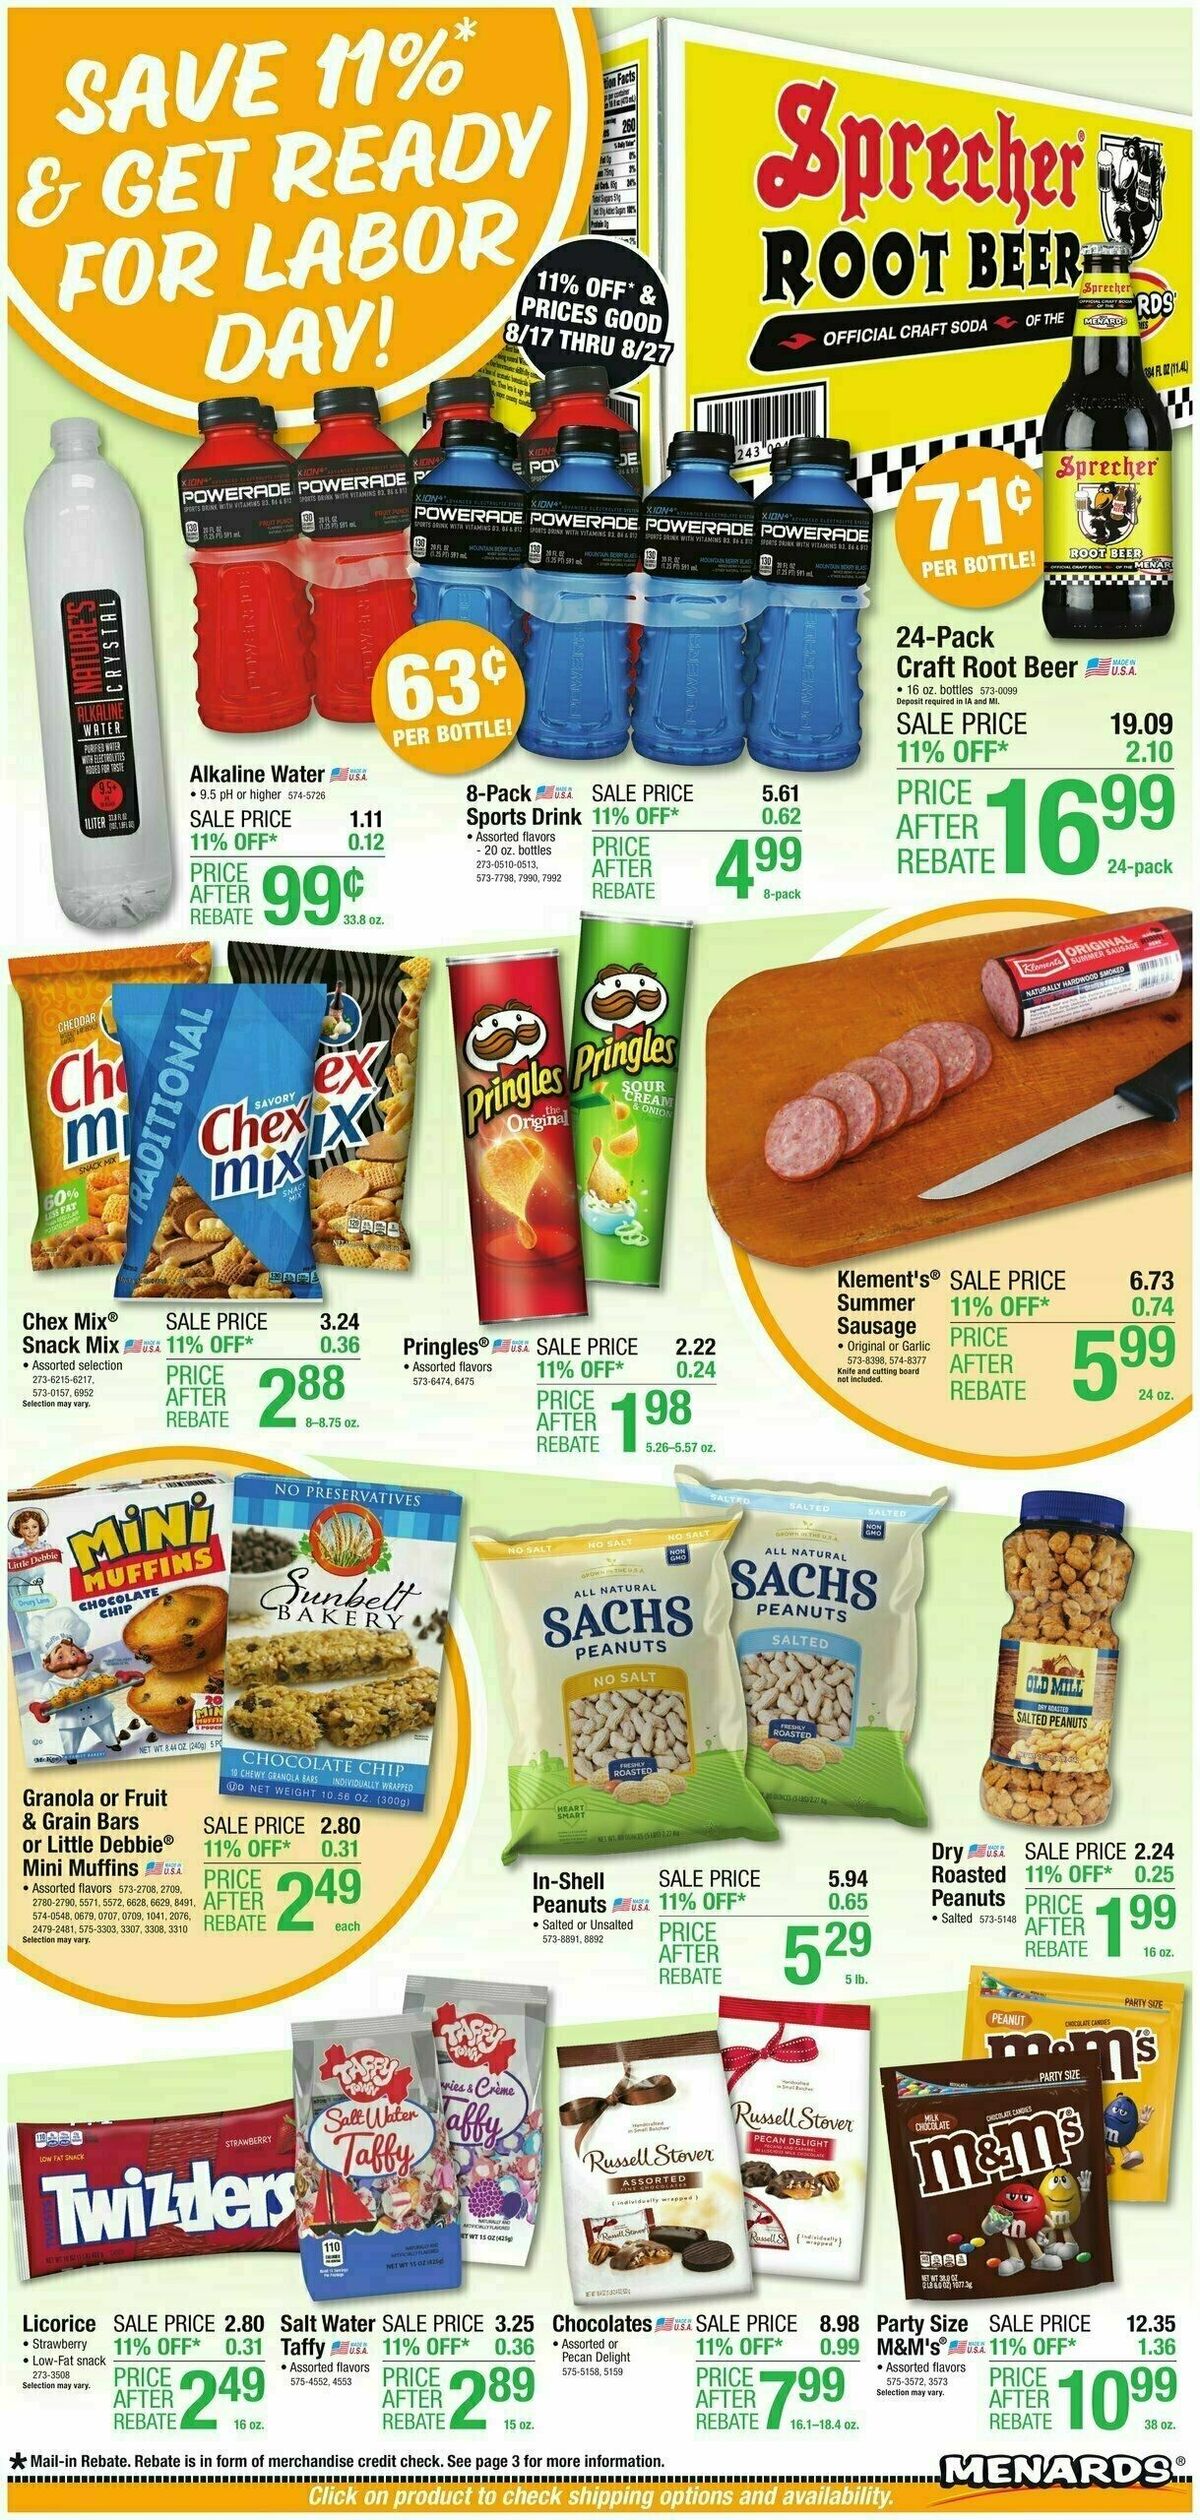 Menards Home Essentials Weekly Ad from August 16